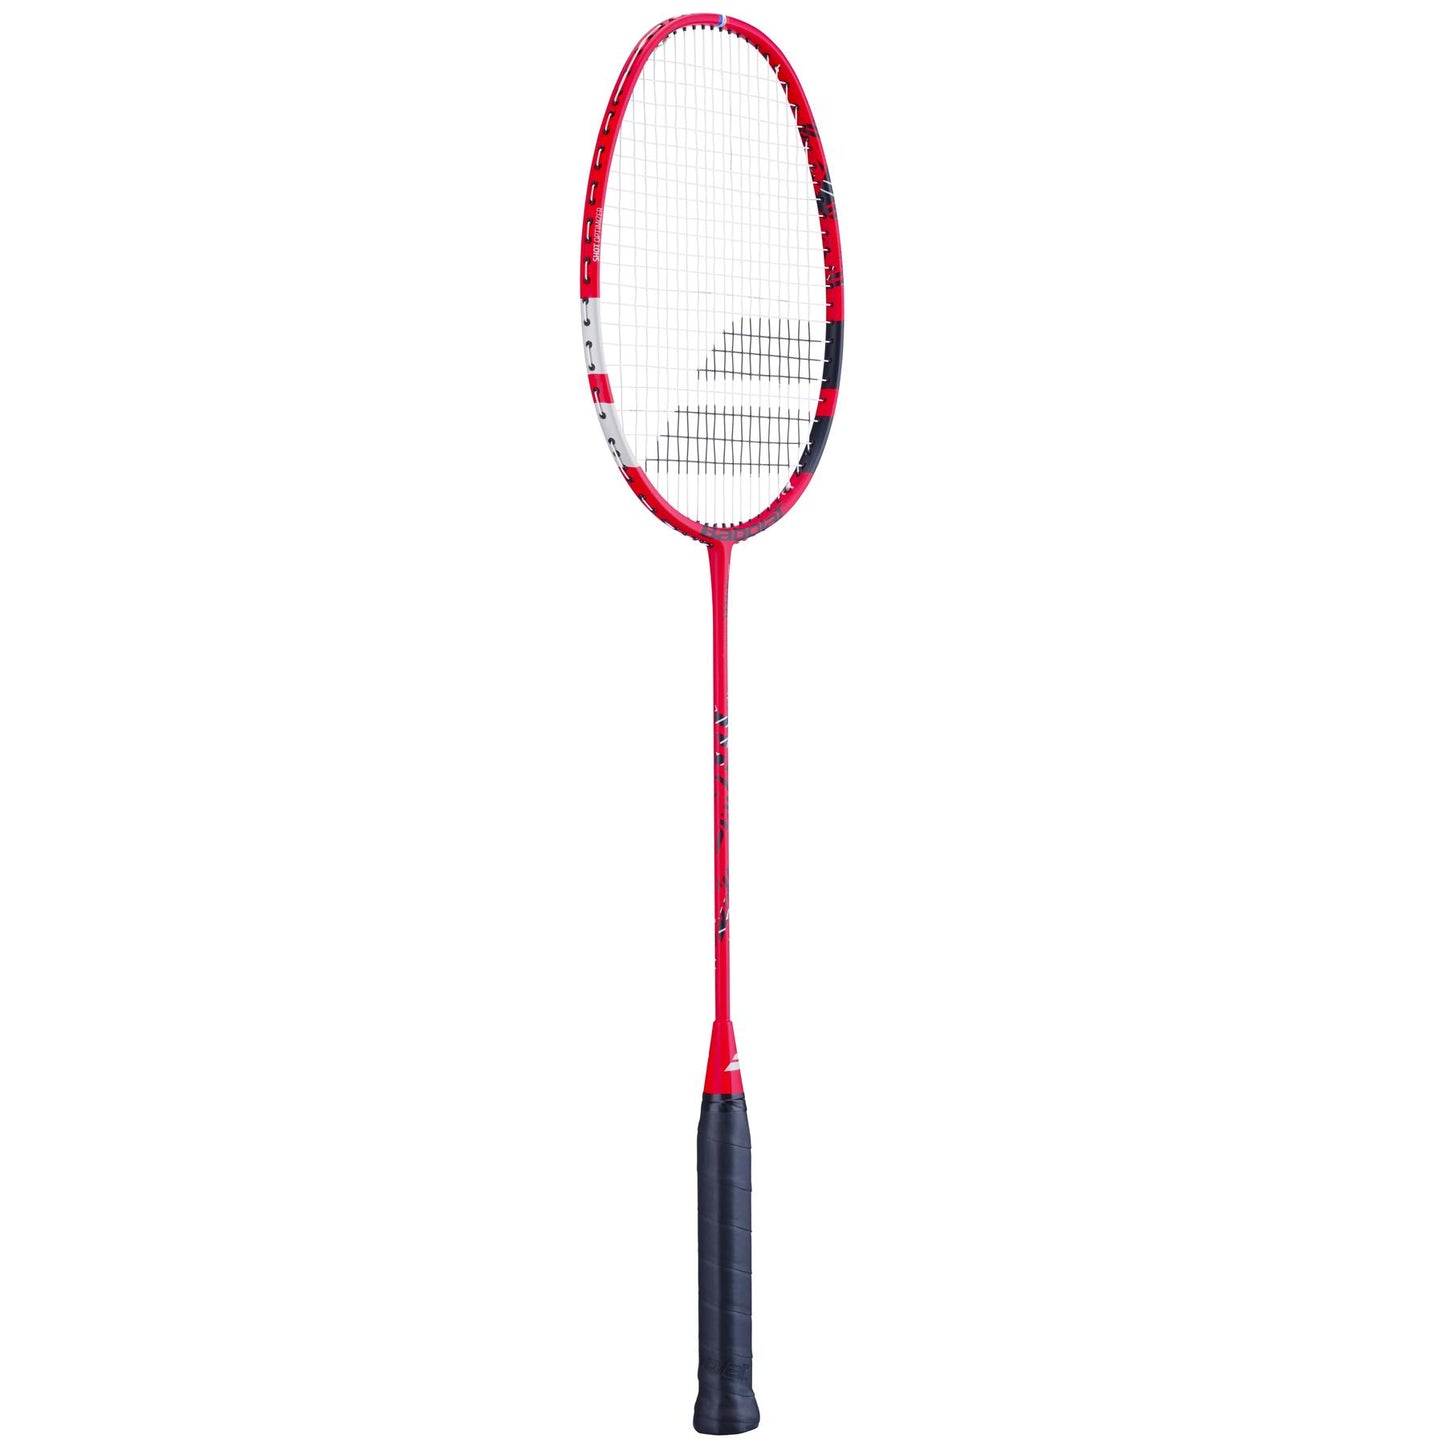 Babolat X-Feel Rise Badminton Racket - Red - Right